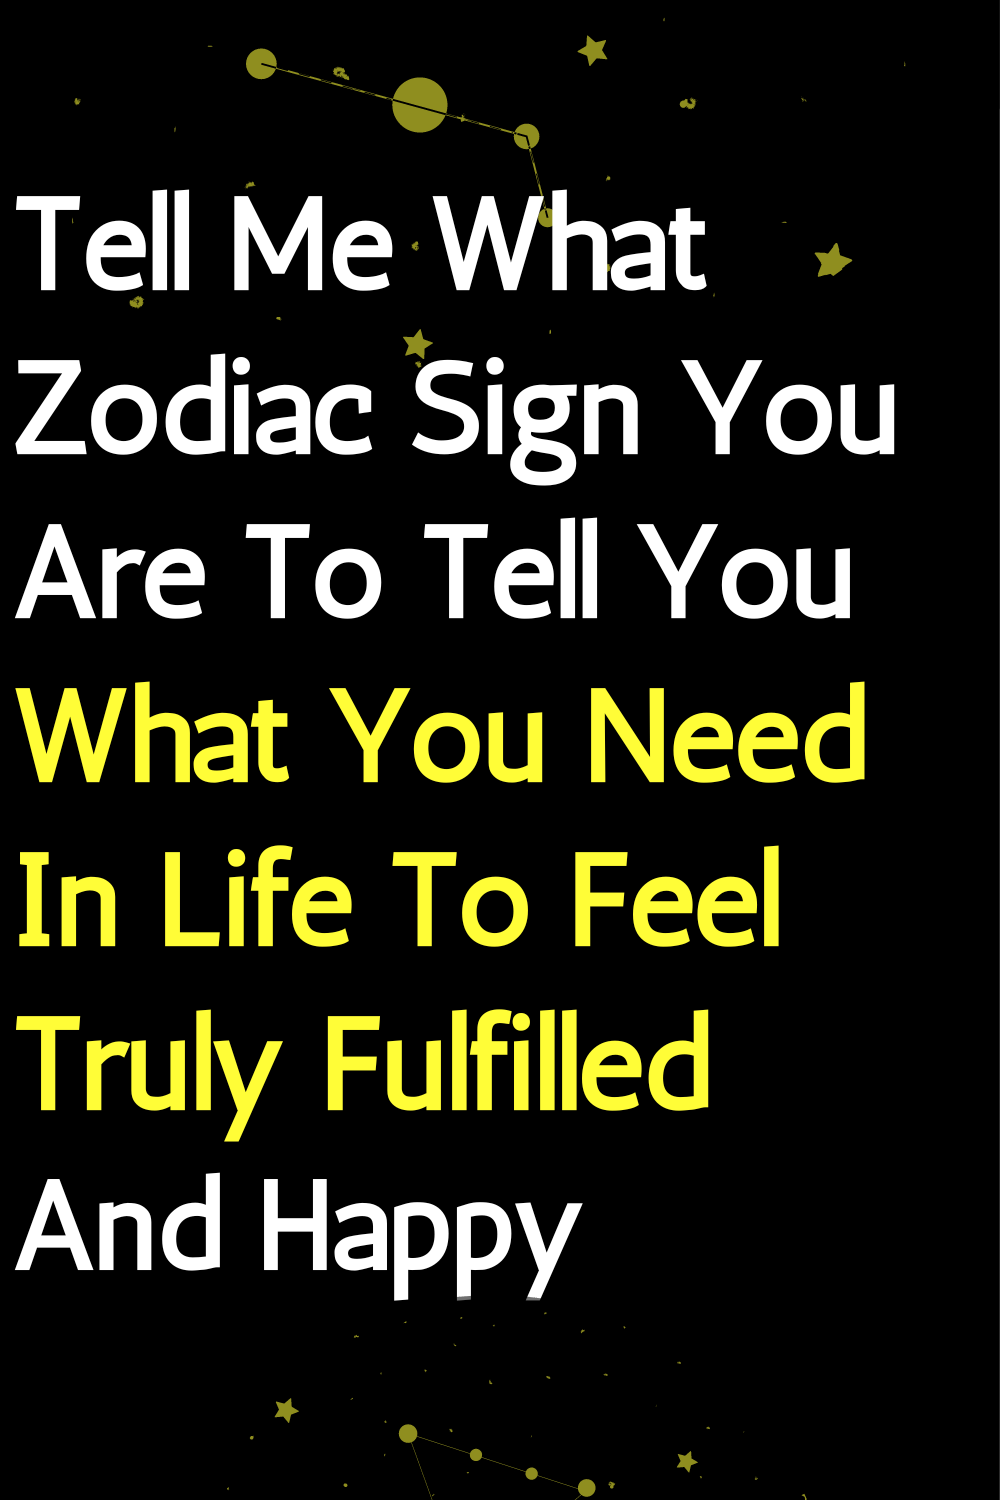 Tell Me What Zodiac Sign You Are To Tell You What You Need In Life To Feel Truly Fulfilled And Happy